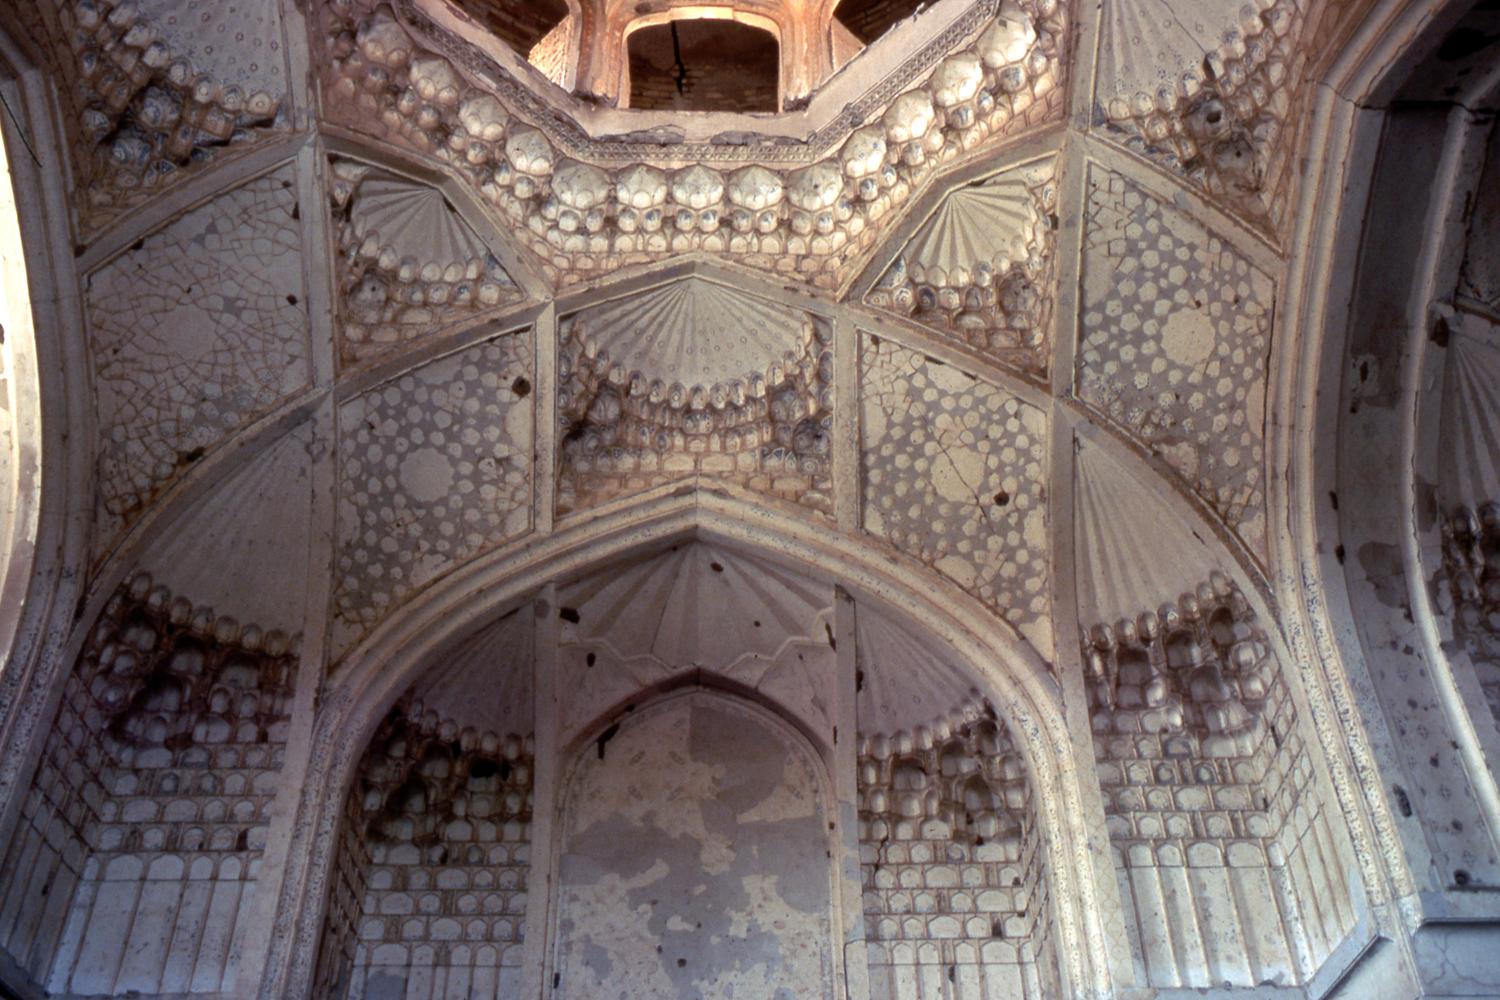 Interior view of squinch-net vaulting transitioning to dome